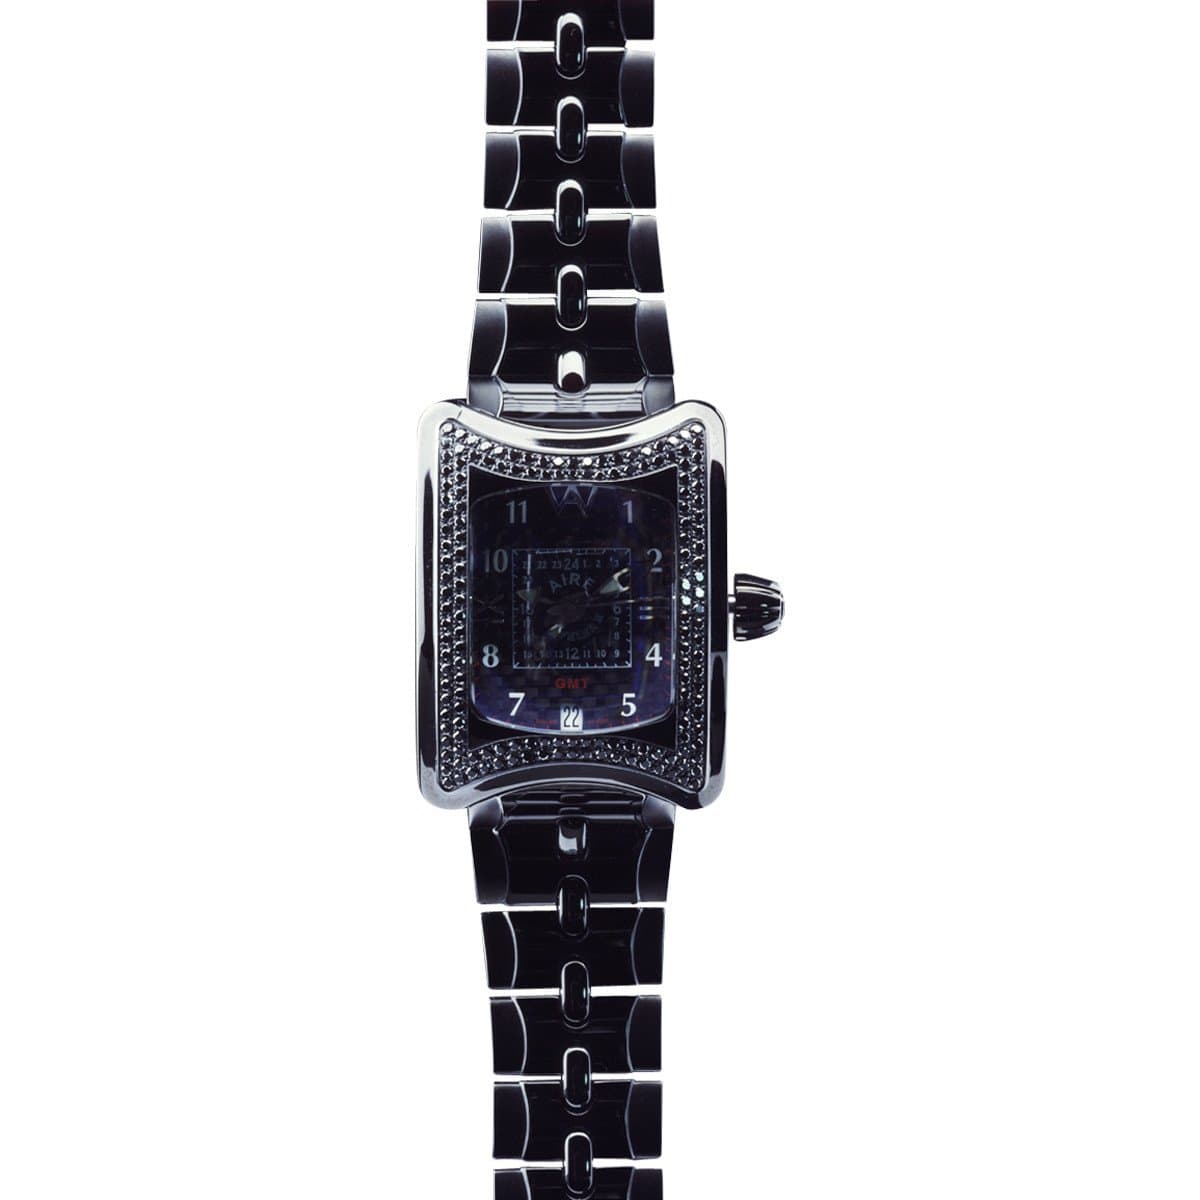 CHRIS AIRE WATCH - TRAVELER II GMT BLACK - Chris Aire Fine Jewelry & Timepieces